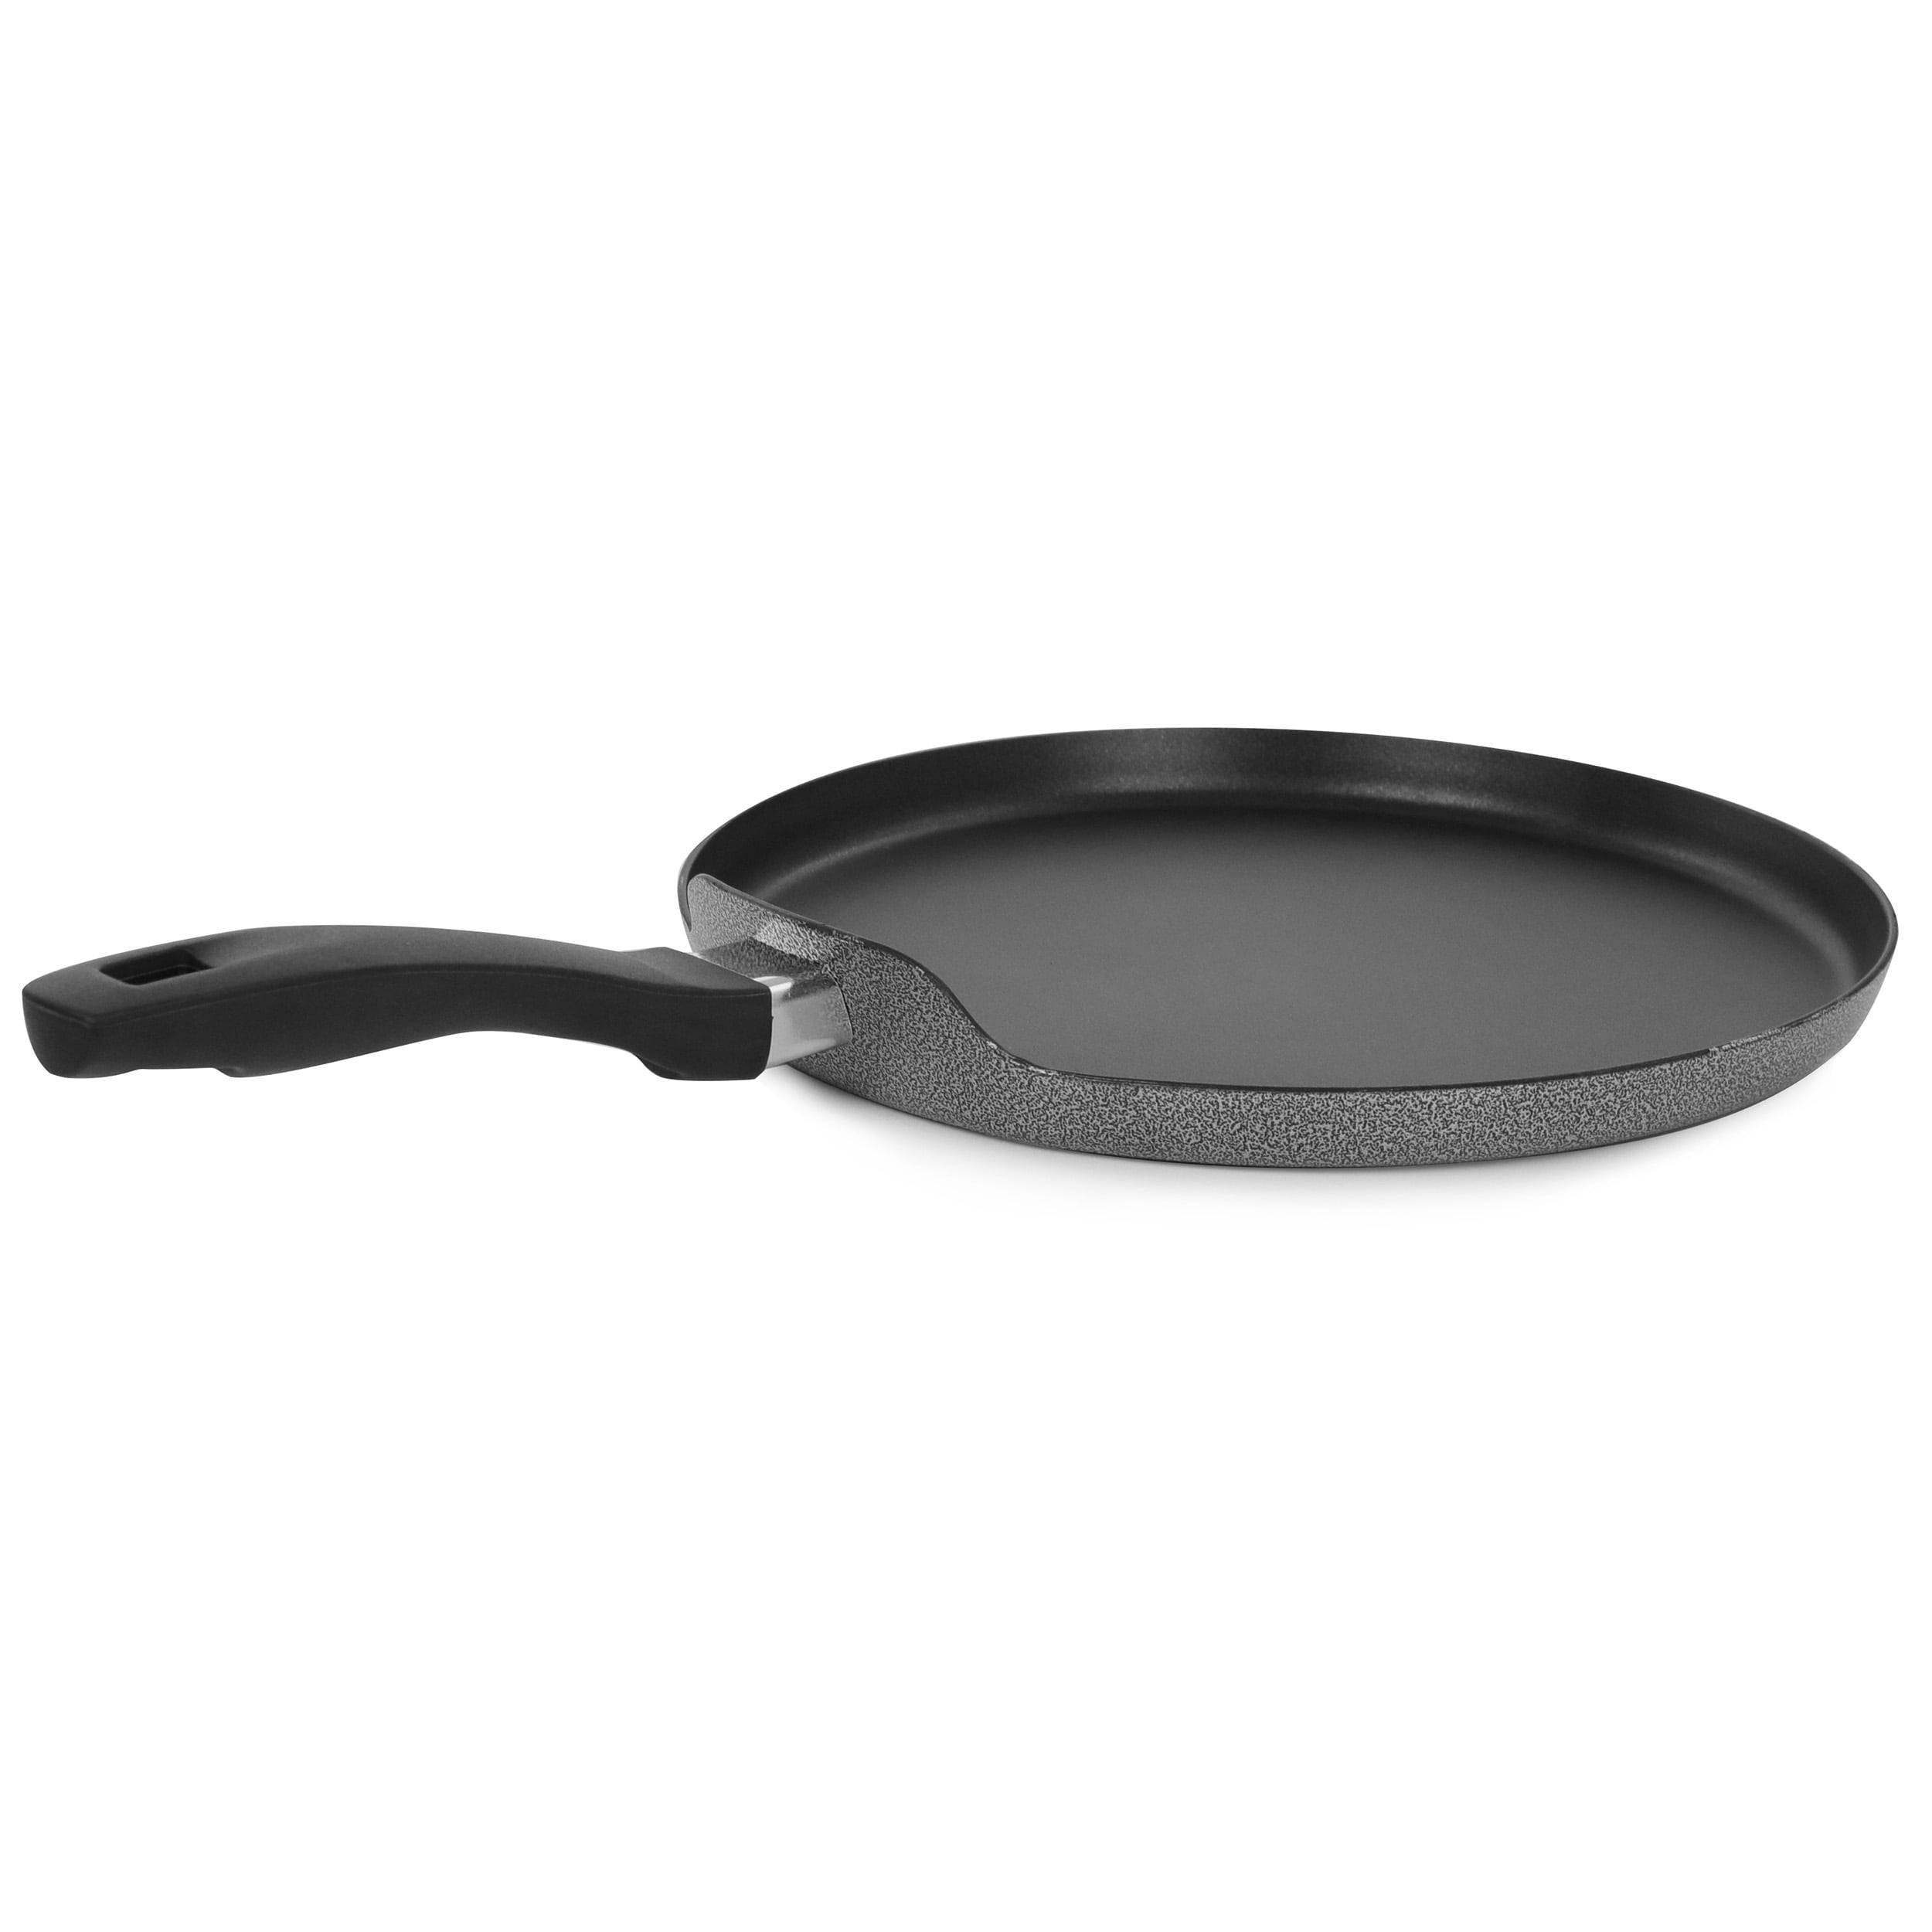 https://ak1.ostkcdn.com/images/products/is/images/direct/a74cc483ad96a92aab7e4107bd4b12353118d1e2/Oster-11-Inch-Nonstick-Aluminum-Pancake-Pan.jpg